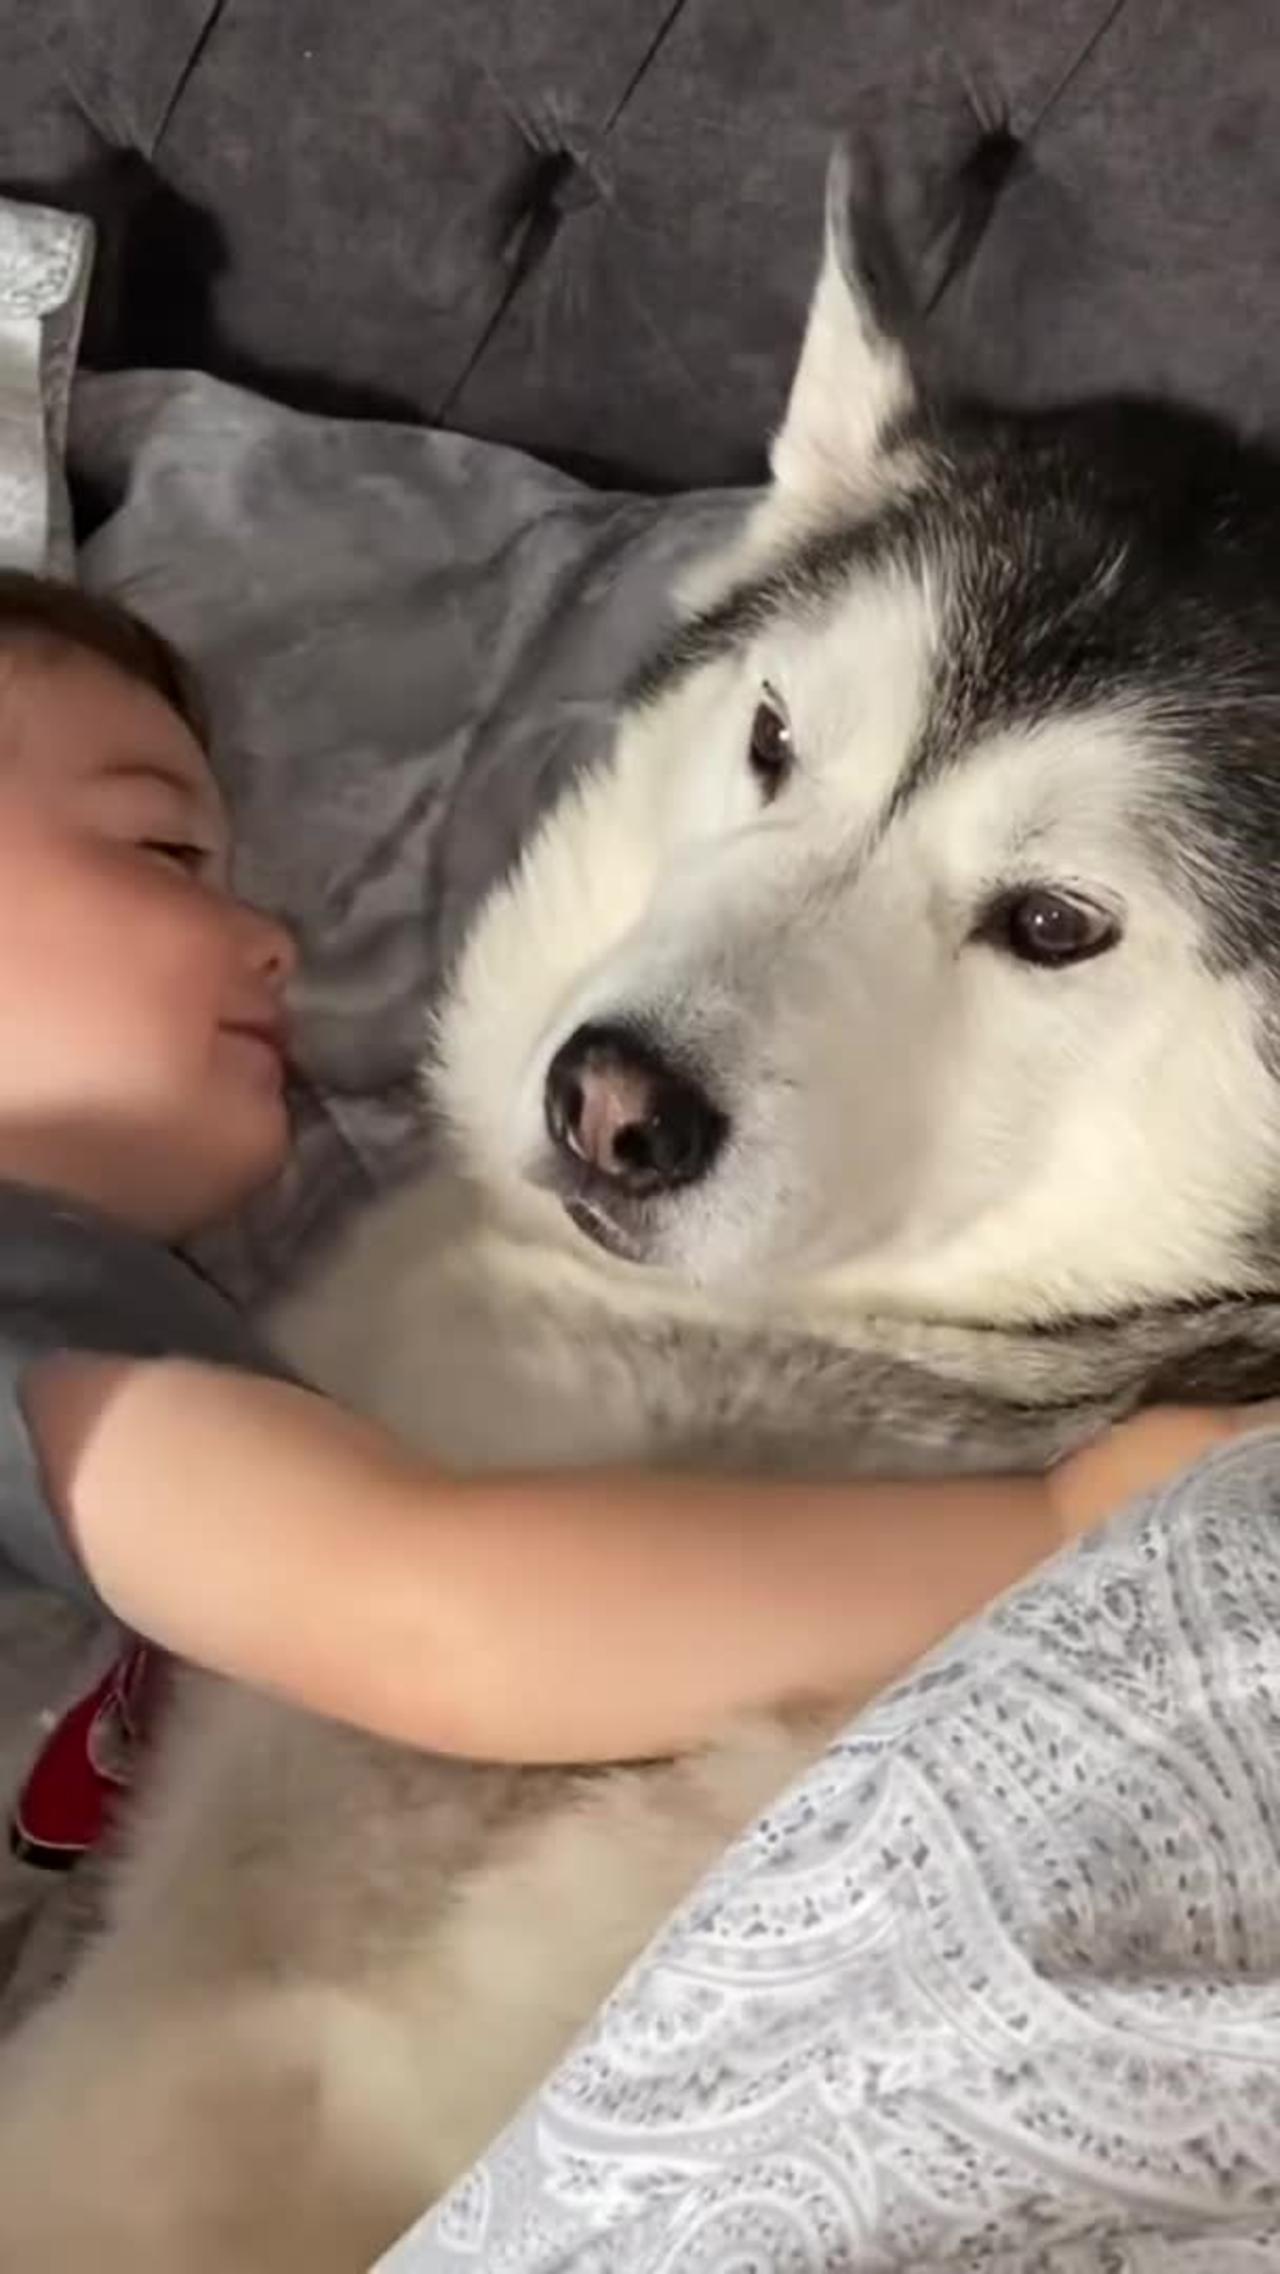 The Full 4 Year Story Of My Husky & Baby Becoming Best Friends and their relation